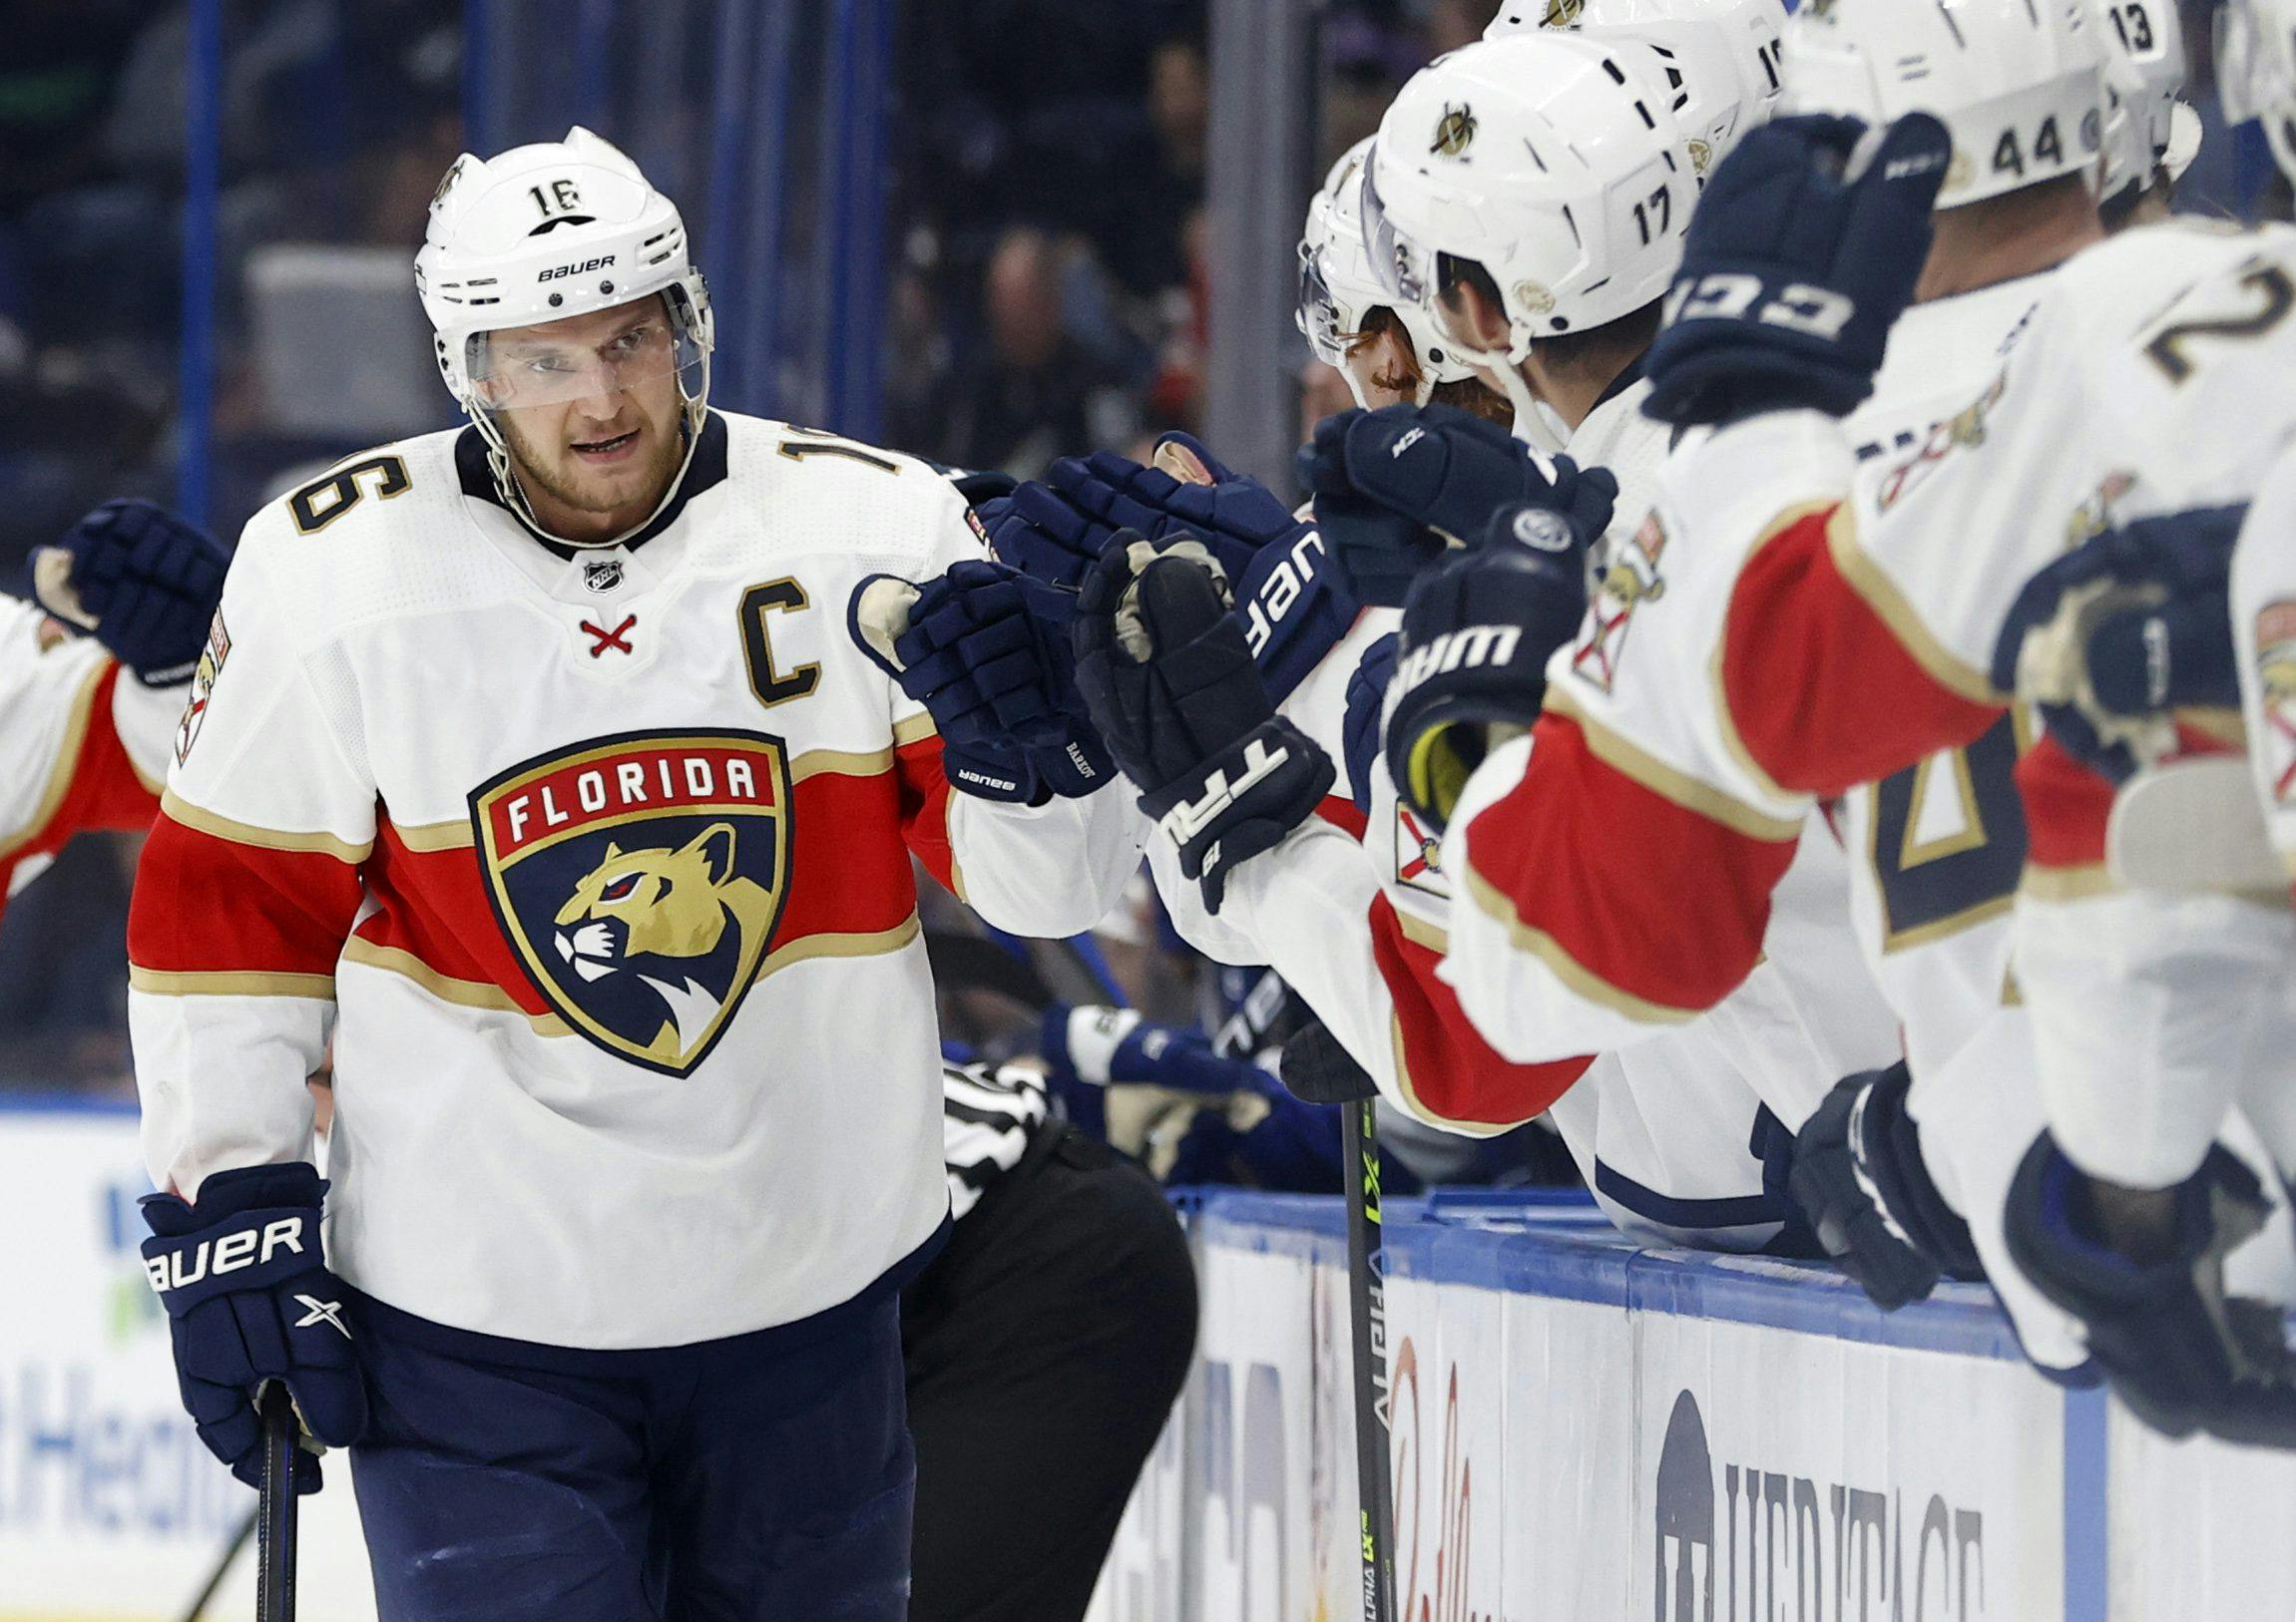 Game Preview: NY Islanders vs. Florida Panthers 10/13/22